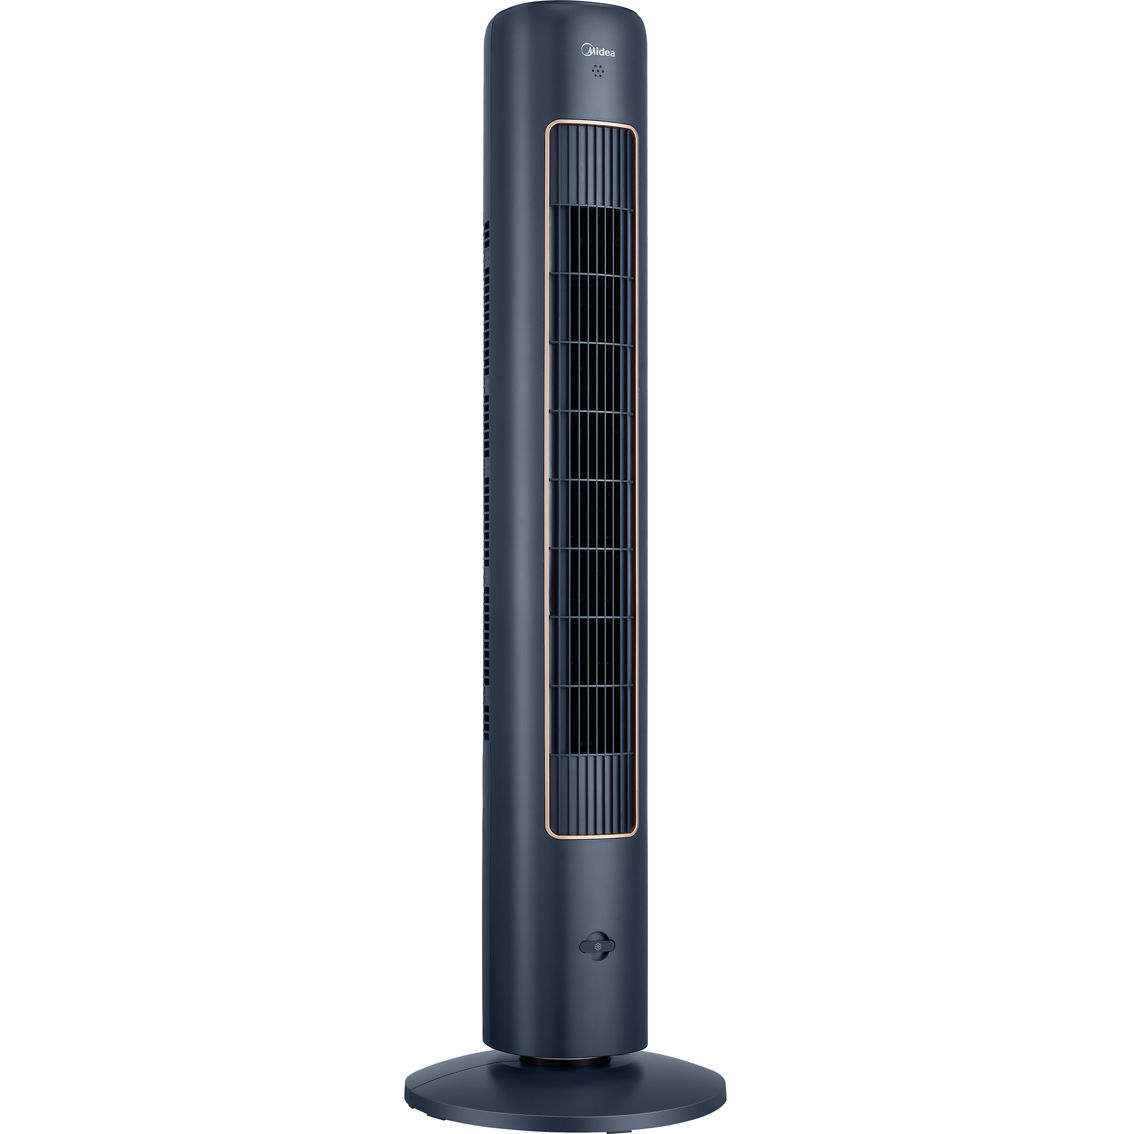 Midea 42 in. Wi-Fi enabled Oscillating Tower Fan - Image 4 of 6